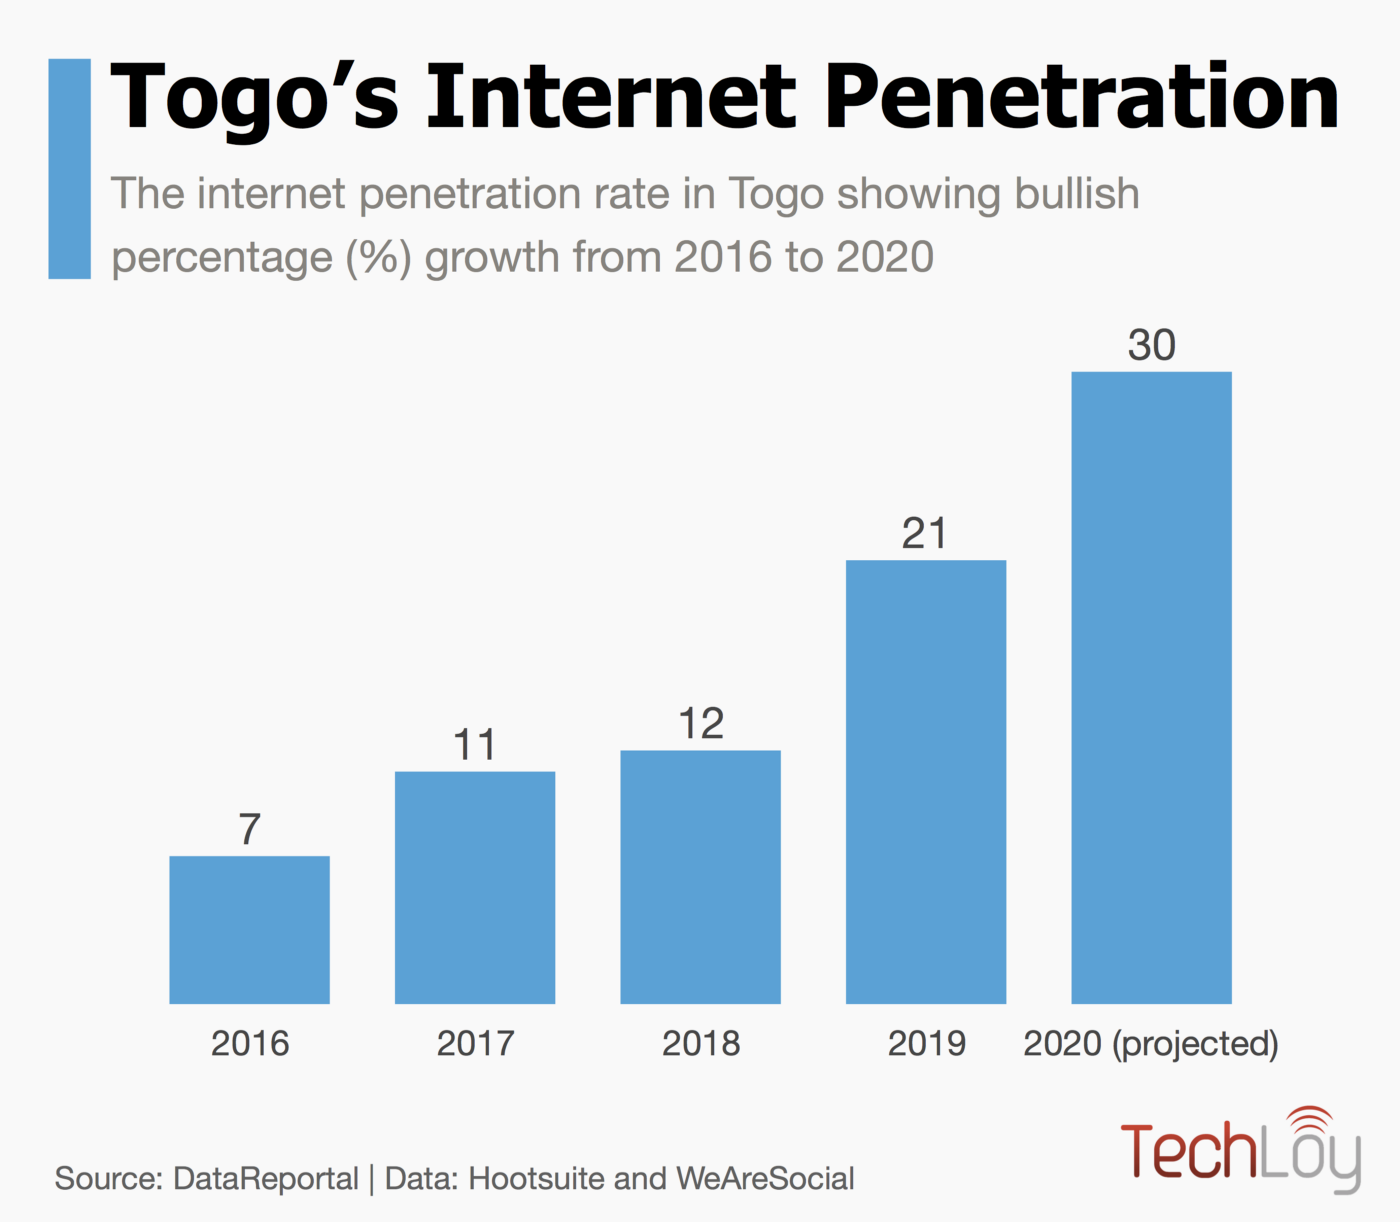 Togo’s internet penetration rate in 2019